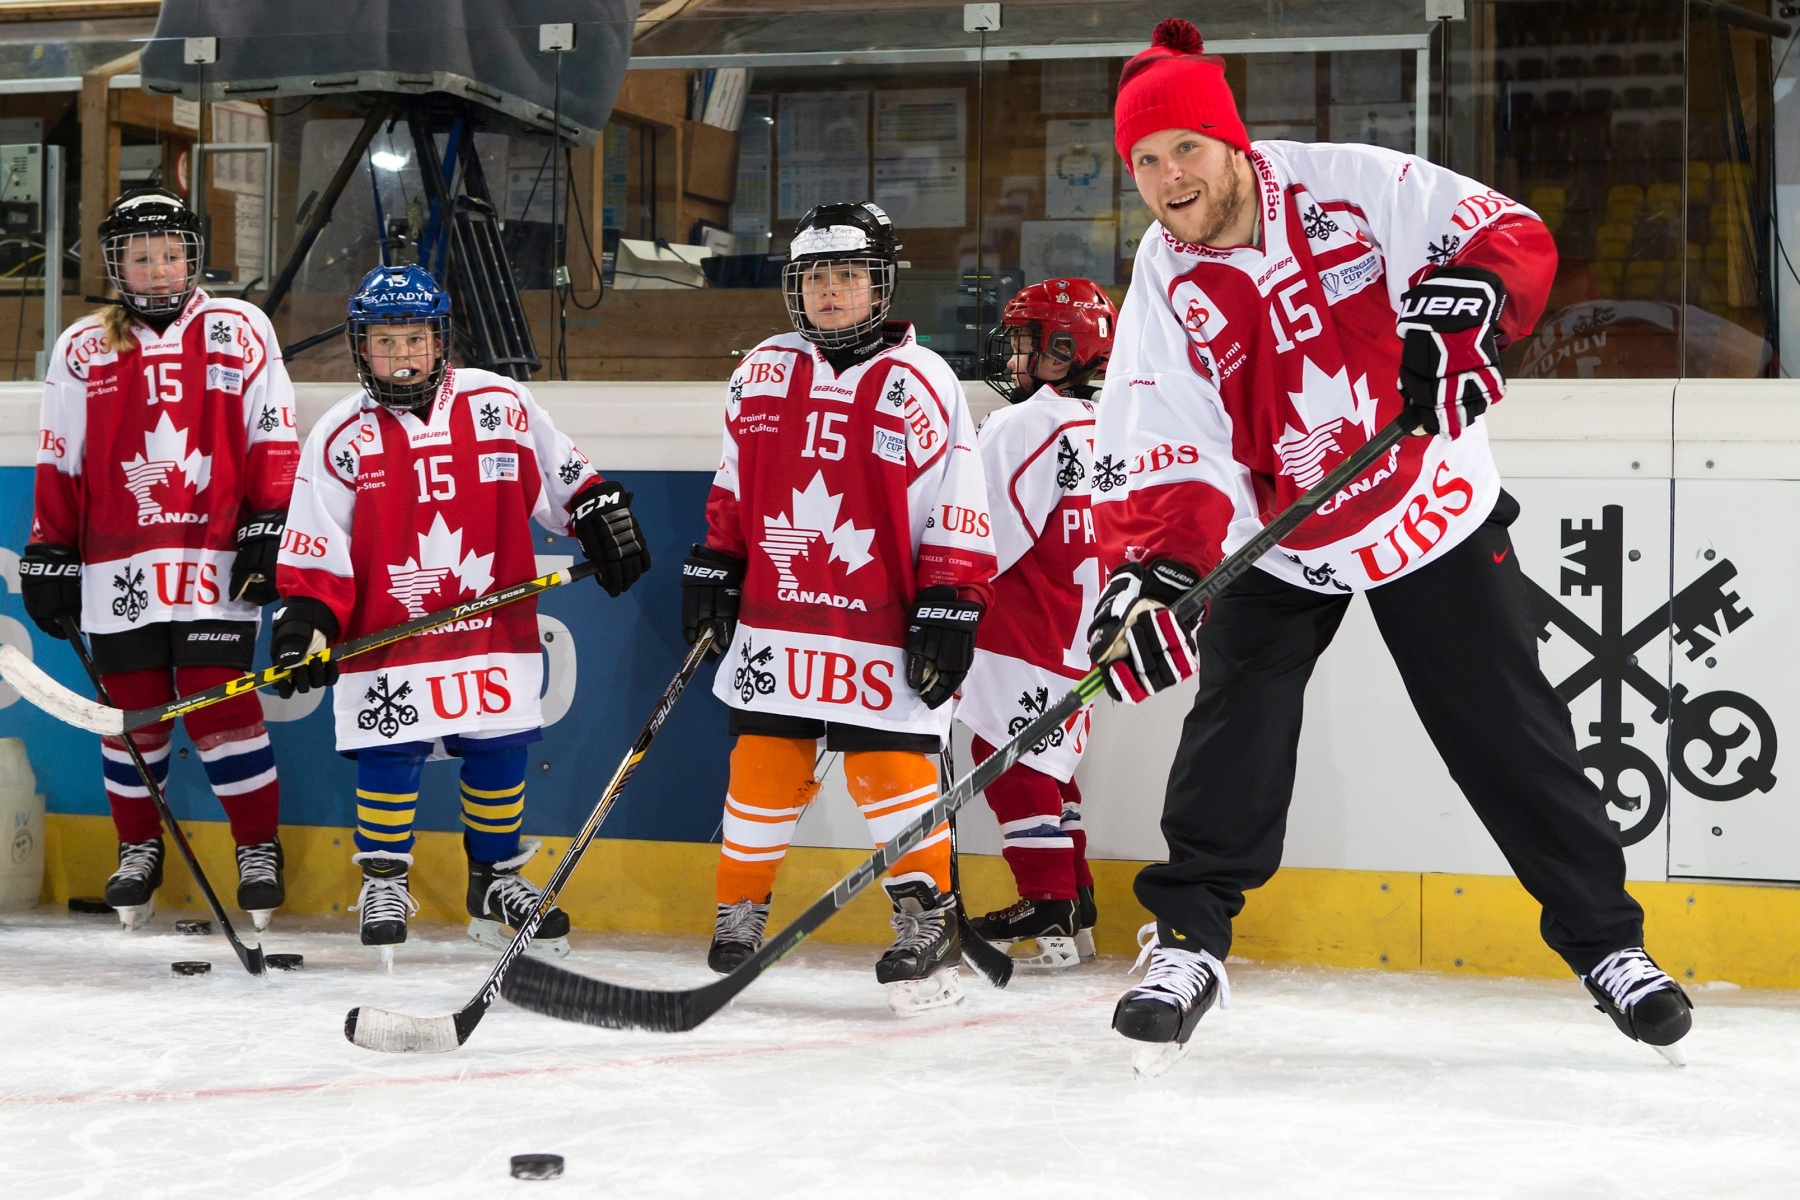 Team Canada's Daniel Vukovic, right, instruct children's during a children's training session during the 89th Spengler Cup ice hockey tournament in Davos, Switzerland, Monday, December 28, 2015. (KEYSTONE/Pascal Muller) EISHOCKEY SPENGLER CUP 2015 KIDS DAY